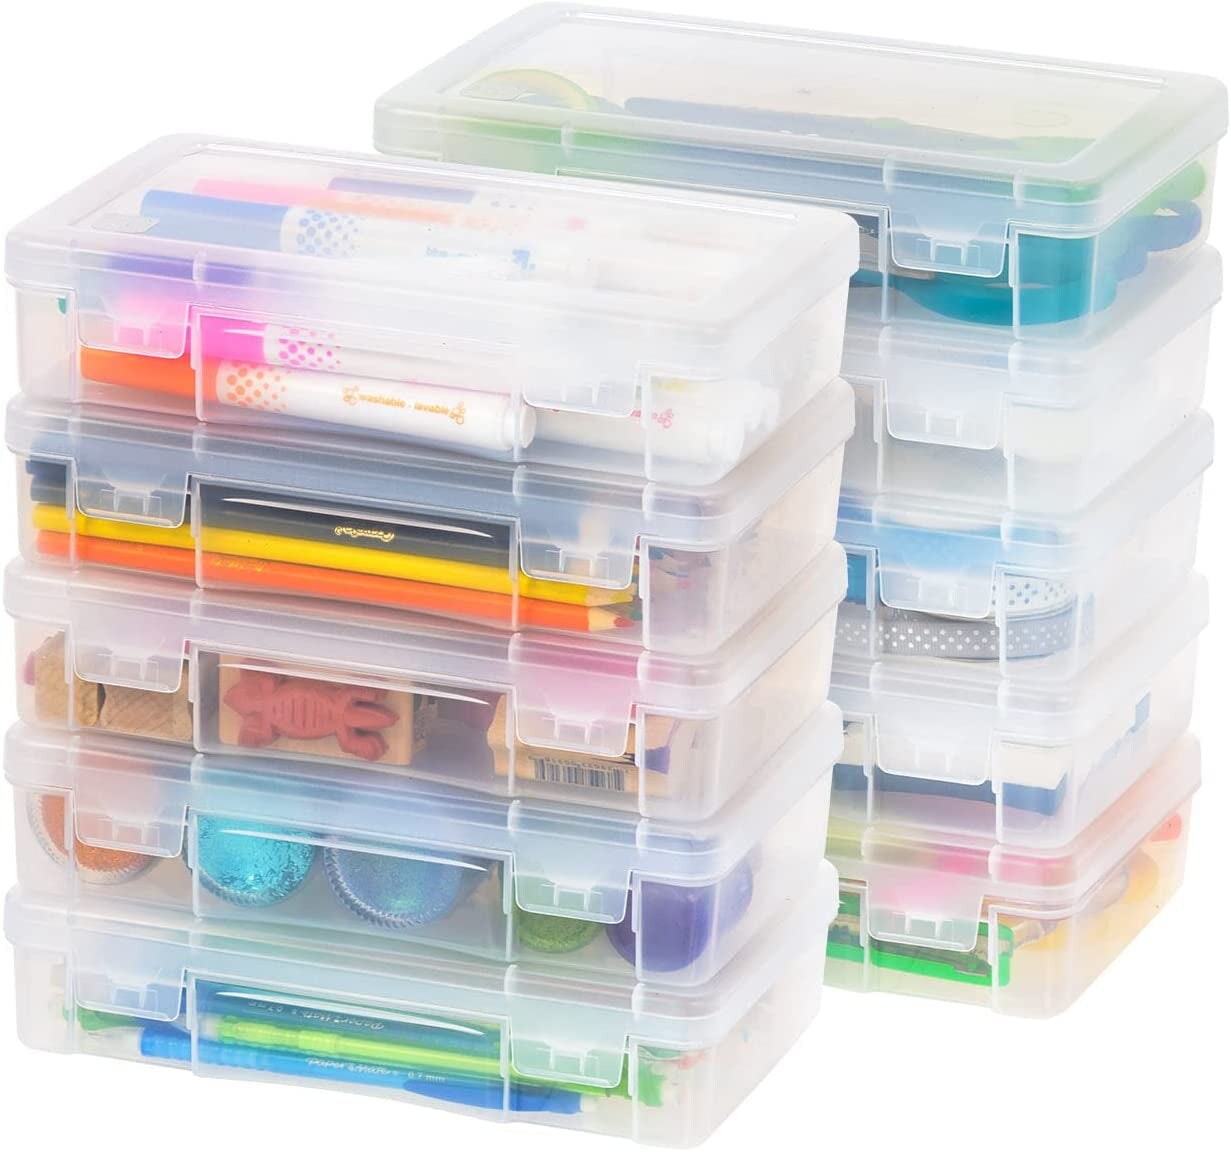 Large Plastic Hobby Art Craft Supply Organizer Storage Box with Snap-Tight  Closure Latch, 10 Pack, Art Satchel Storage Case for Ribbons, Beads